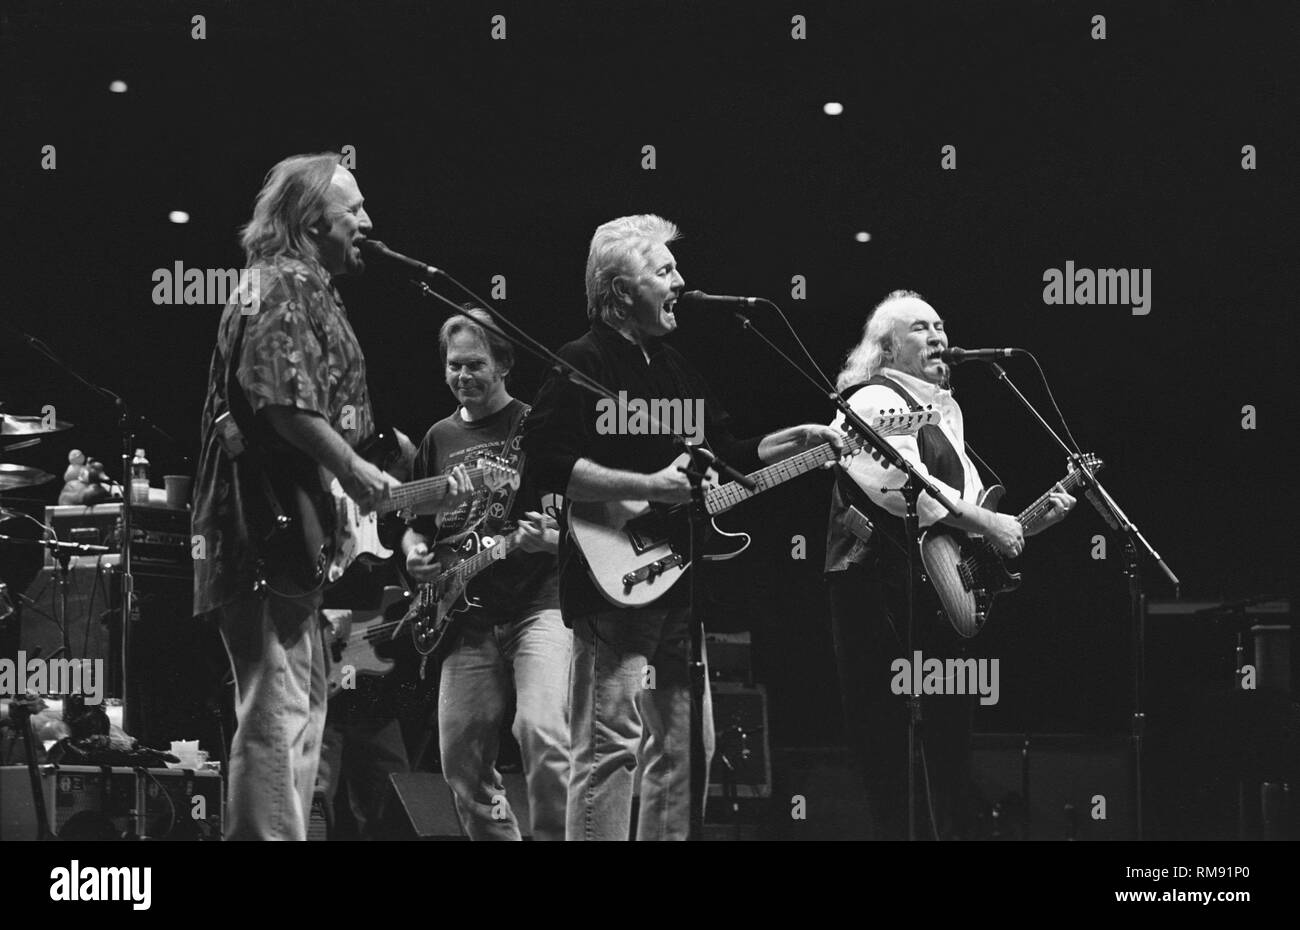 Stephen Stills, Graham Nash, Neil Young and David Crosby are shown performing on stage during a CSN&Y concert appearance. Stock Photo